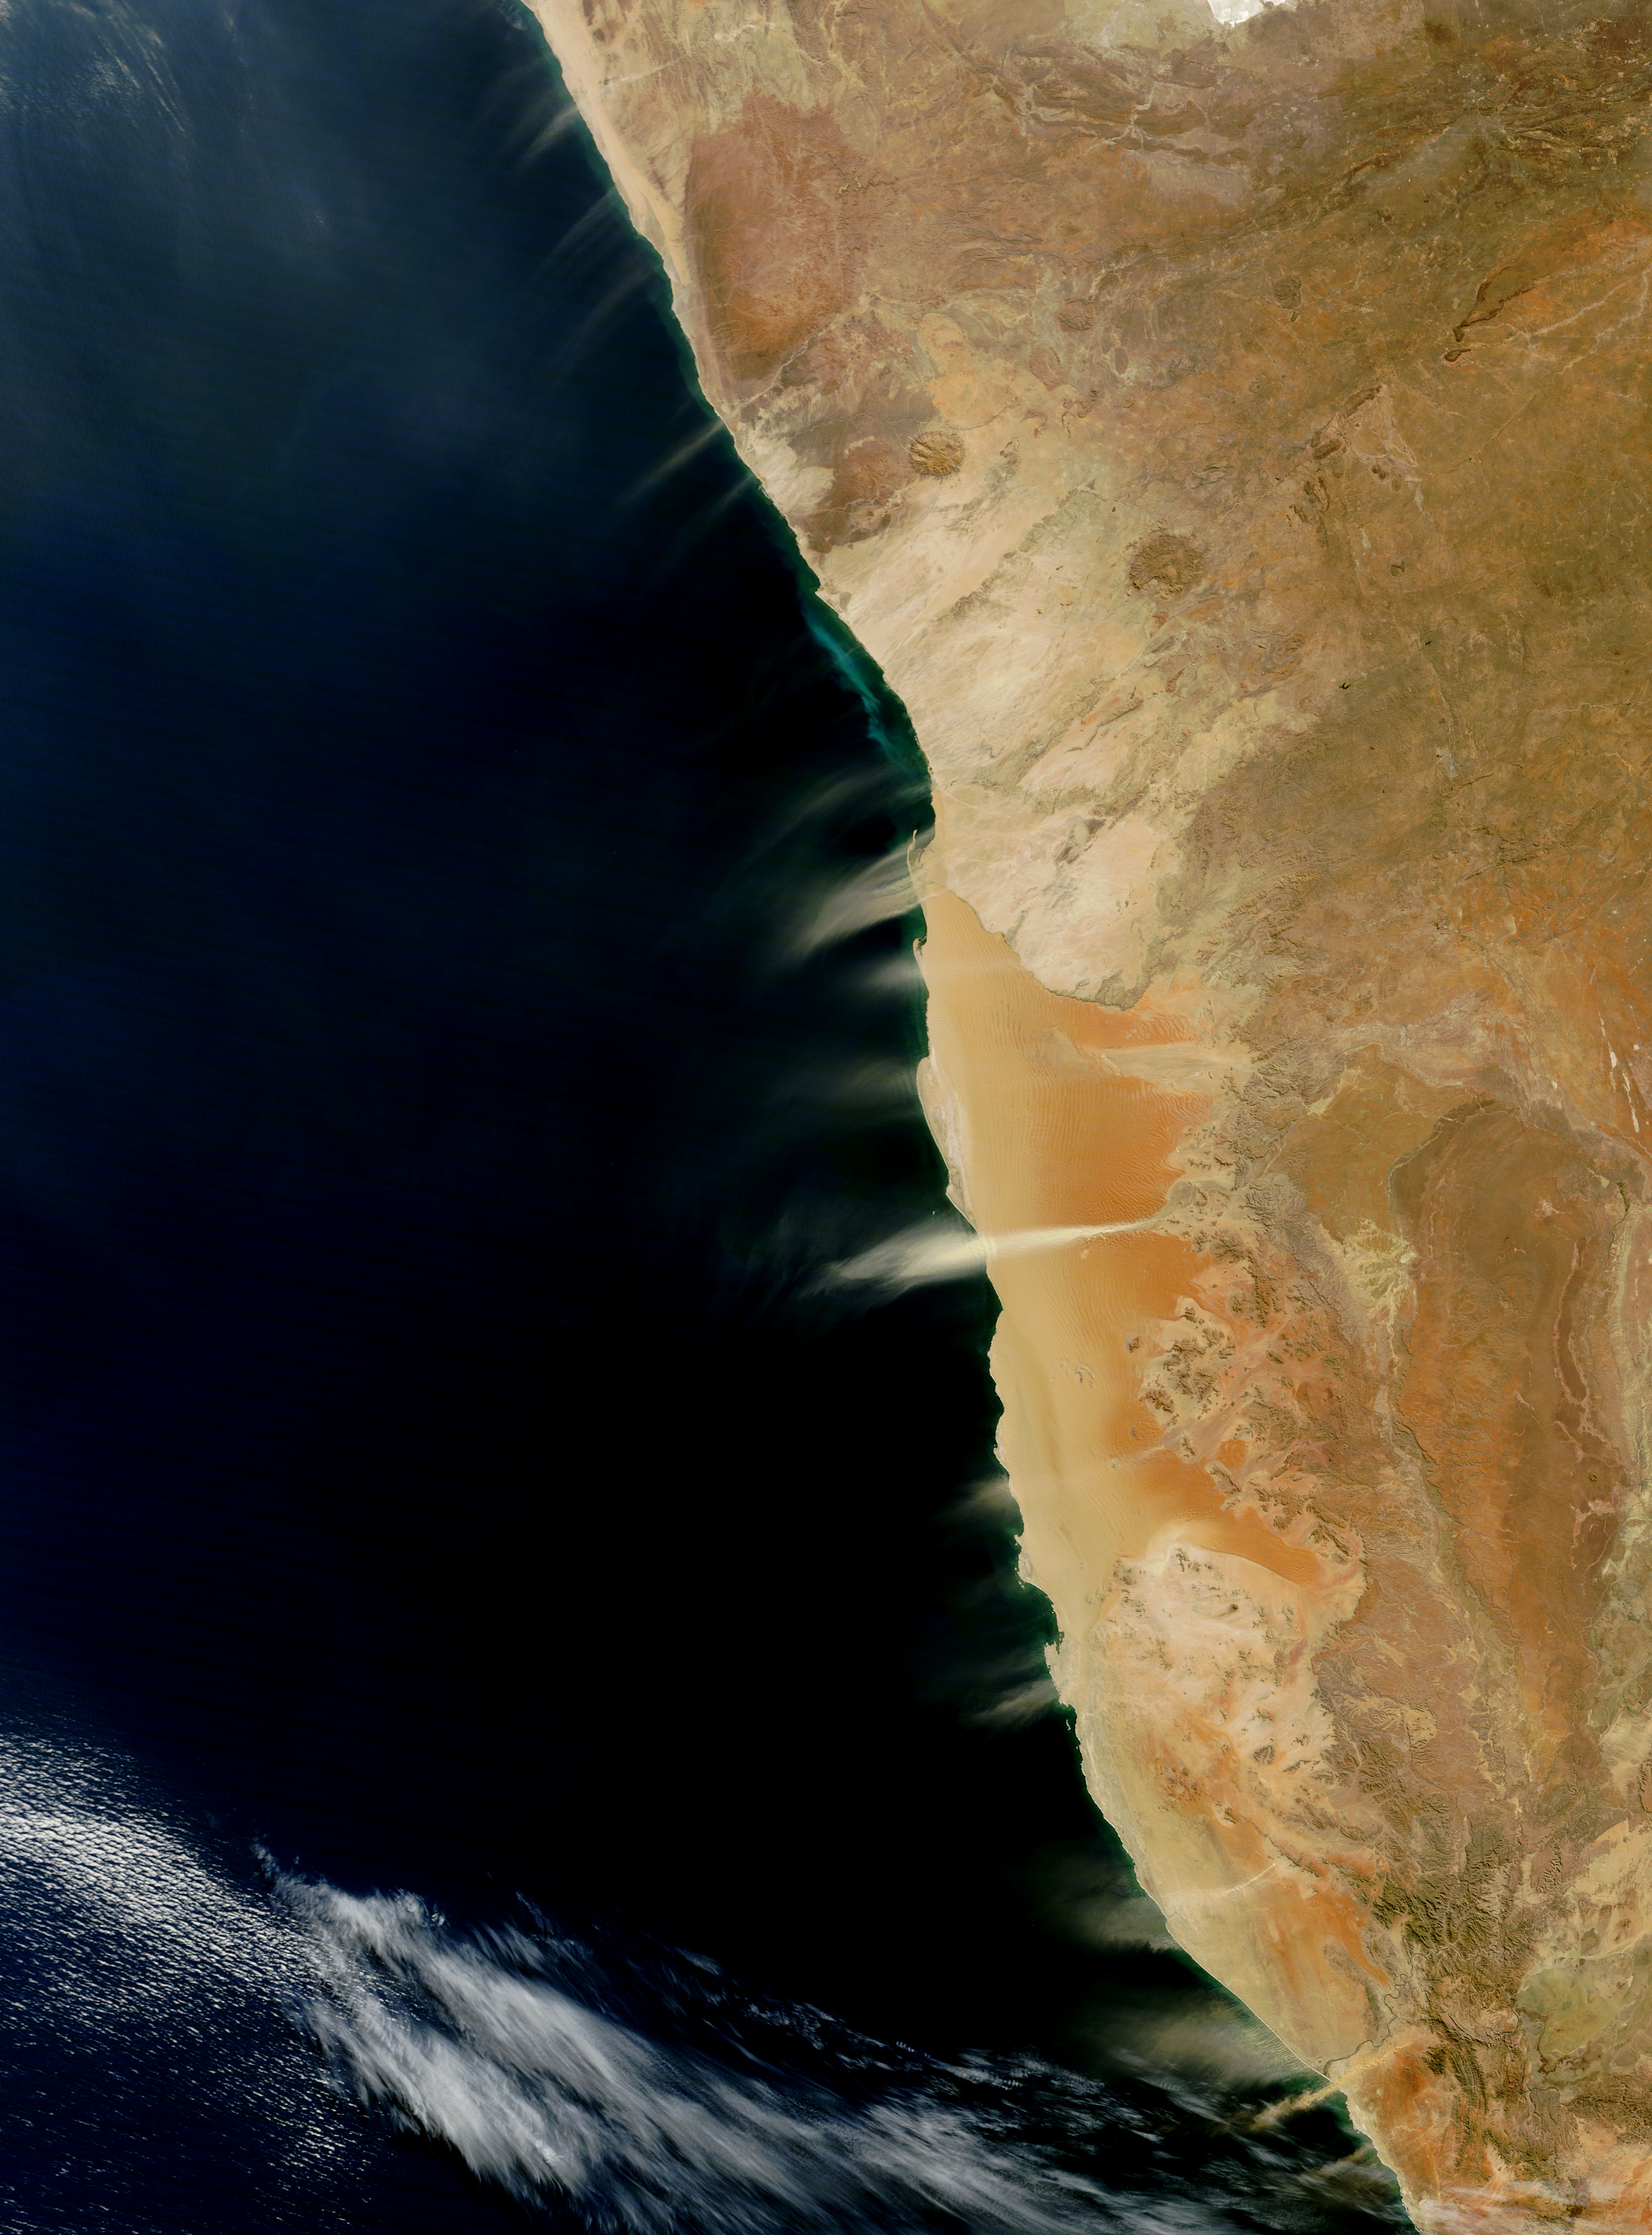 Hydrogen Sulfide and Dust Plumes along the Coast of Namibia - related image preview